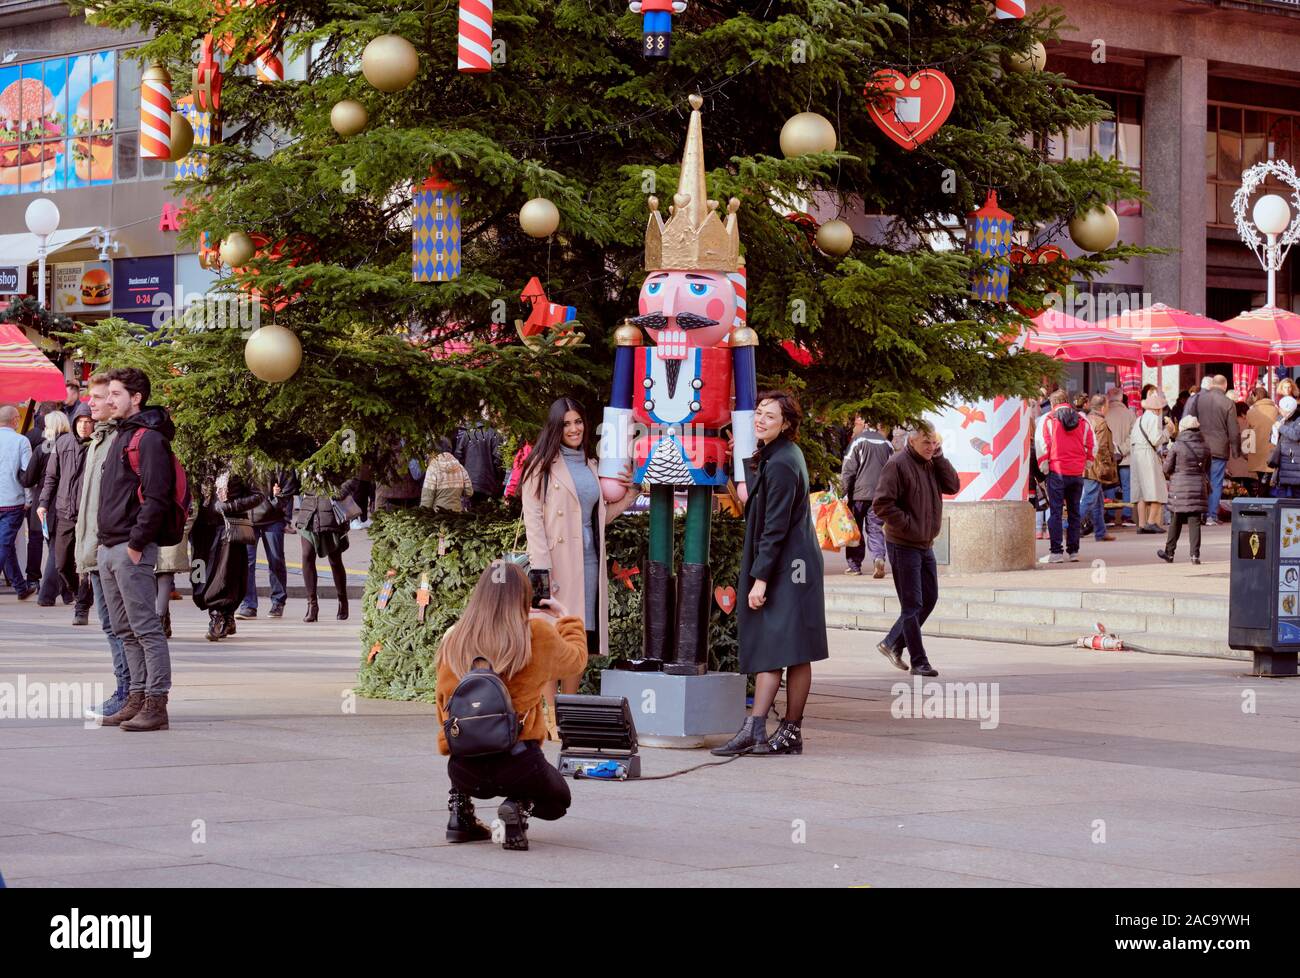 Two lovely ladies posing next to one of the Nutcracker statue next to large Christmas tree in centre square at Advent Market. Zagreb, Croatia Stock Photo